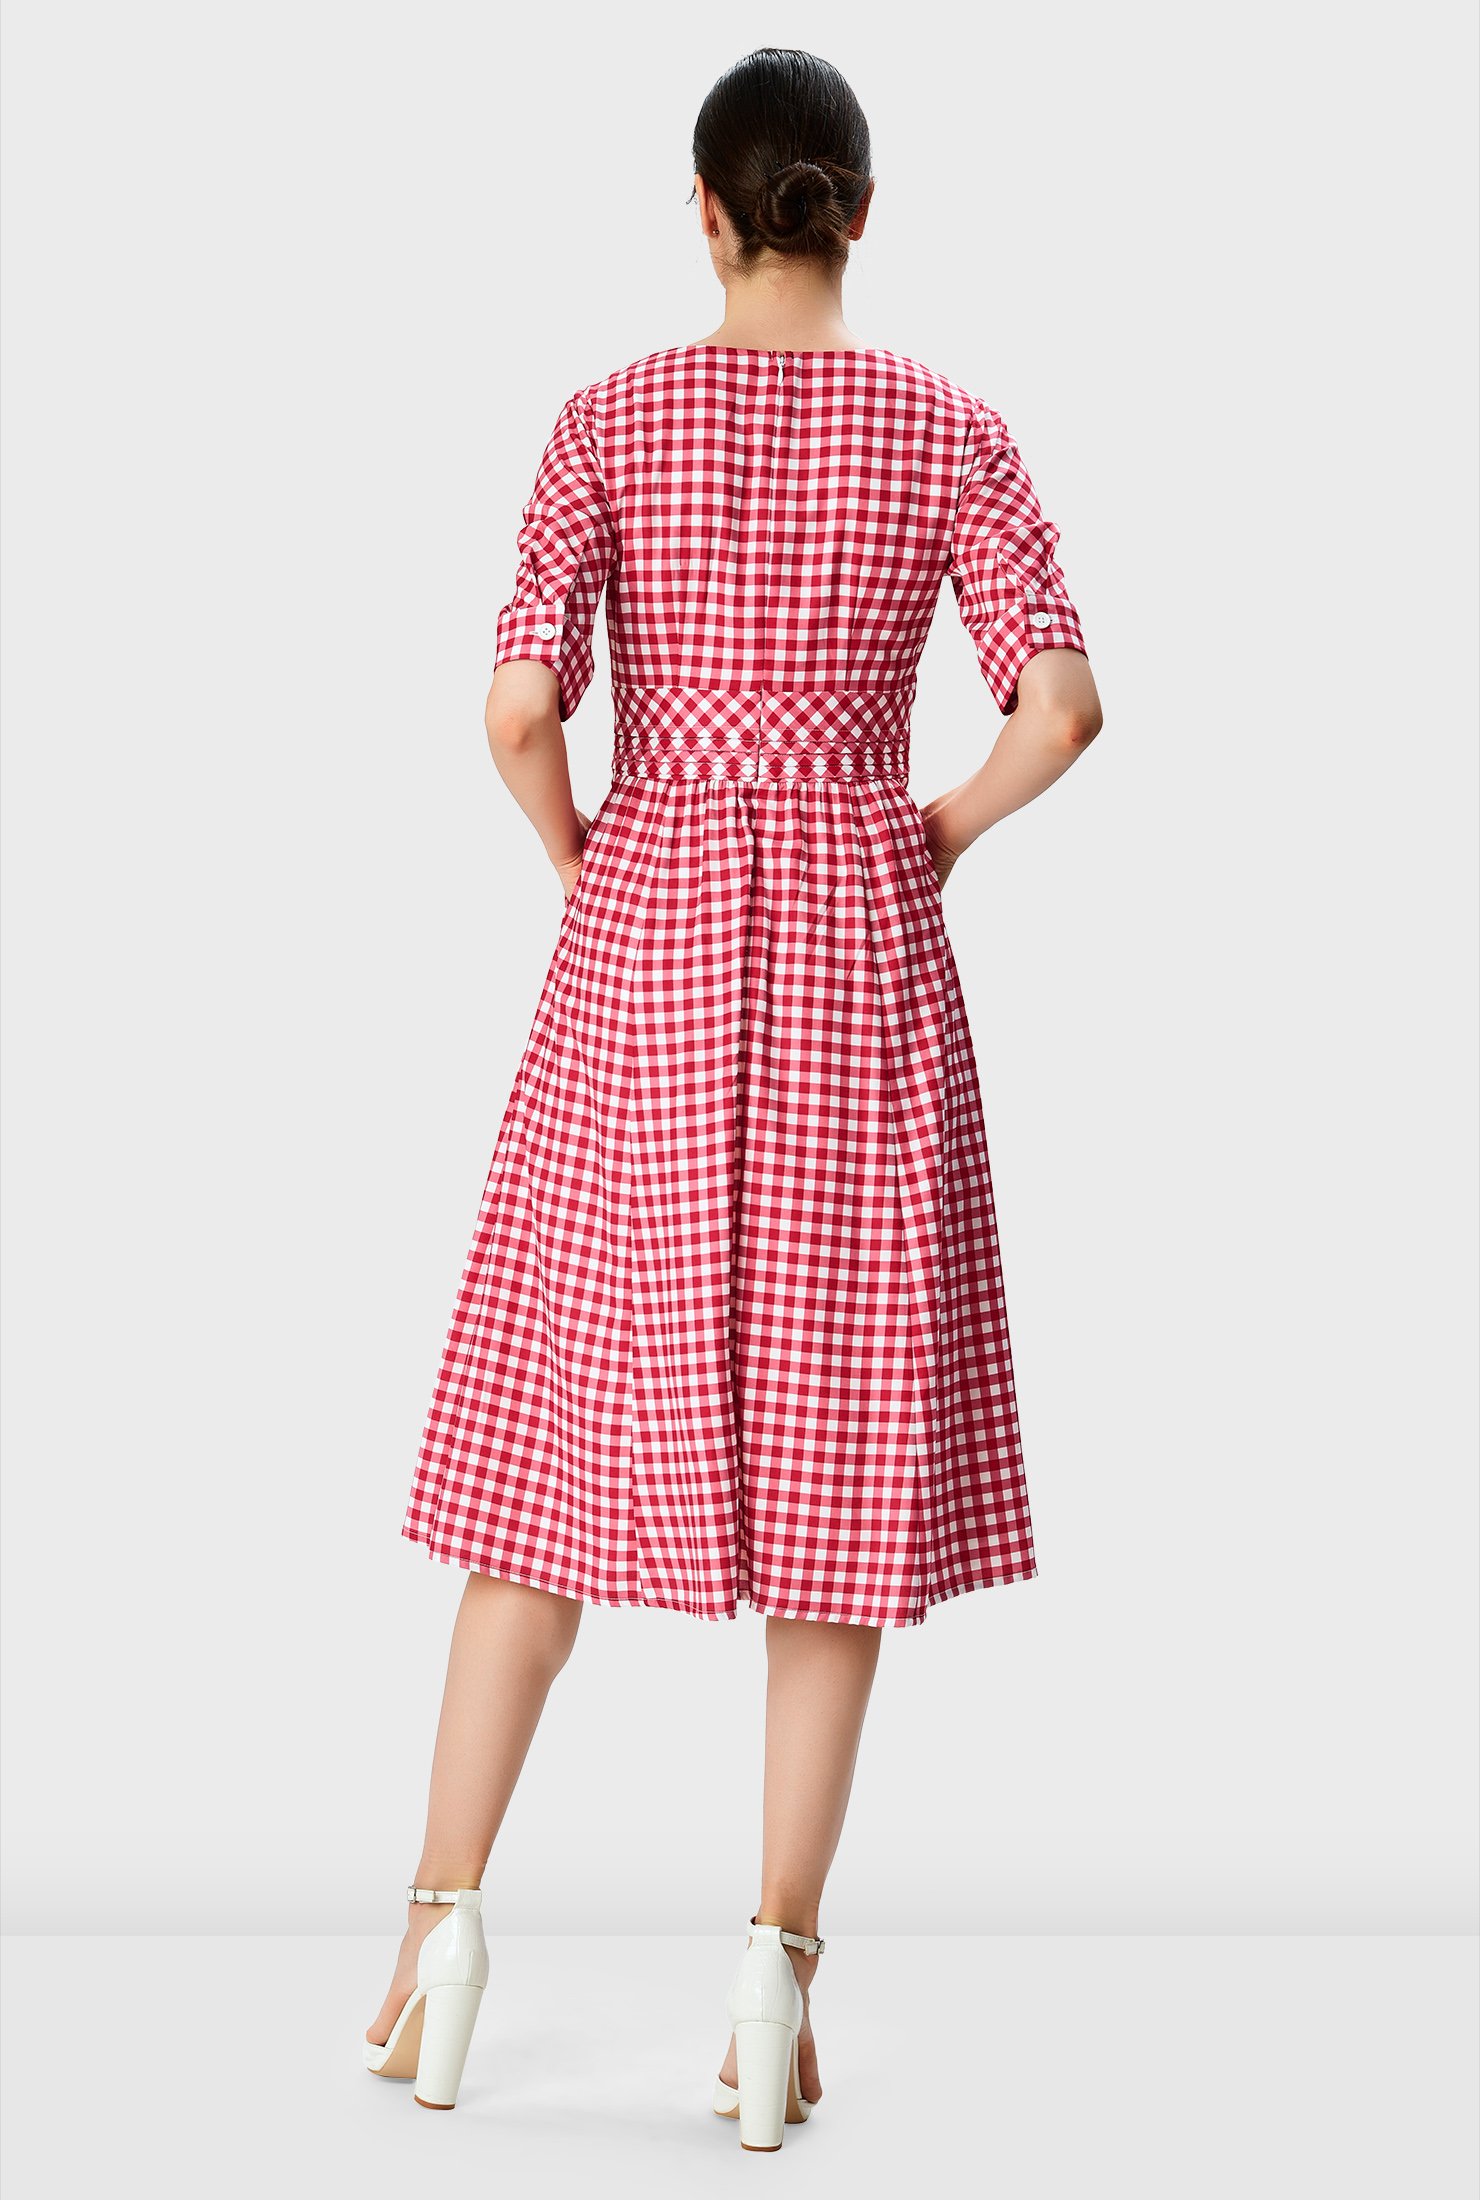 The summer dress refresh! Our gingham check print crepe dress is styled with a surplice bodice and pleated empire waist that flares out to a ruched pleat full skirt.